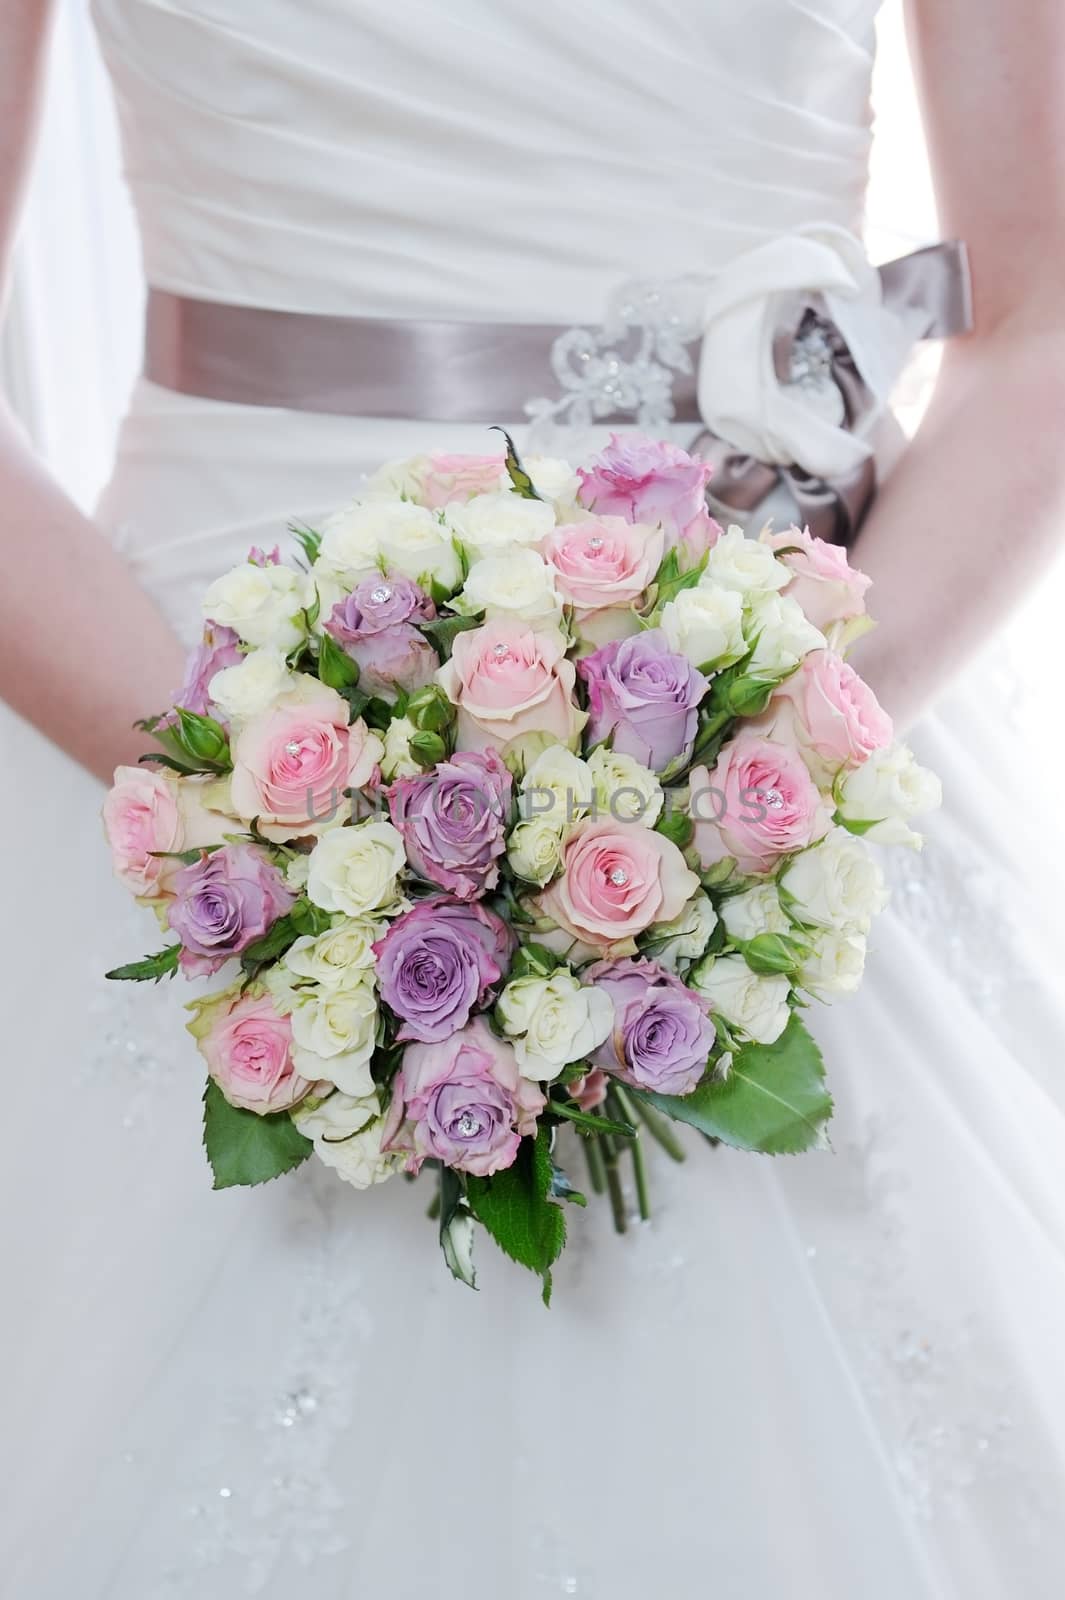 Brides bouquet of pink and purple roses closeup on wedding day